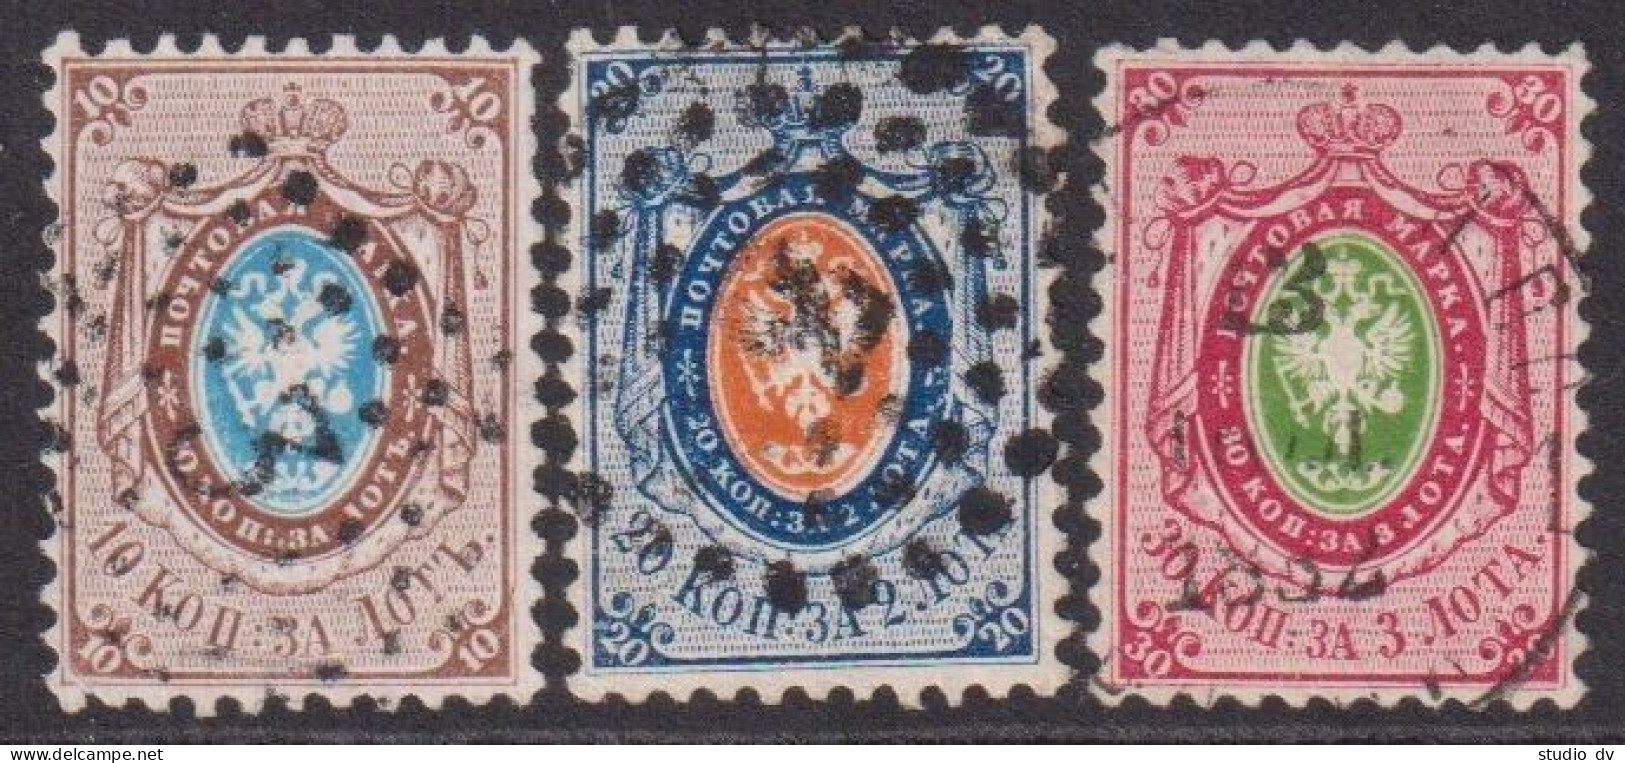 Russia 1858 2nd Issue Mi 5-7 Perf. 12 1/4: 12 1/2, Used, CV 420 EUR - Usati